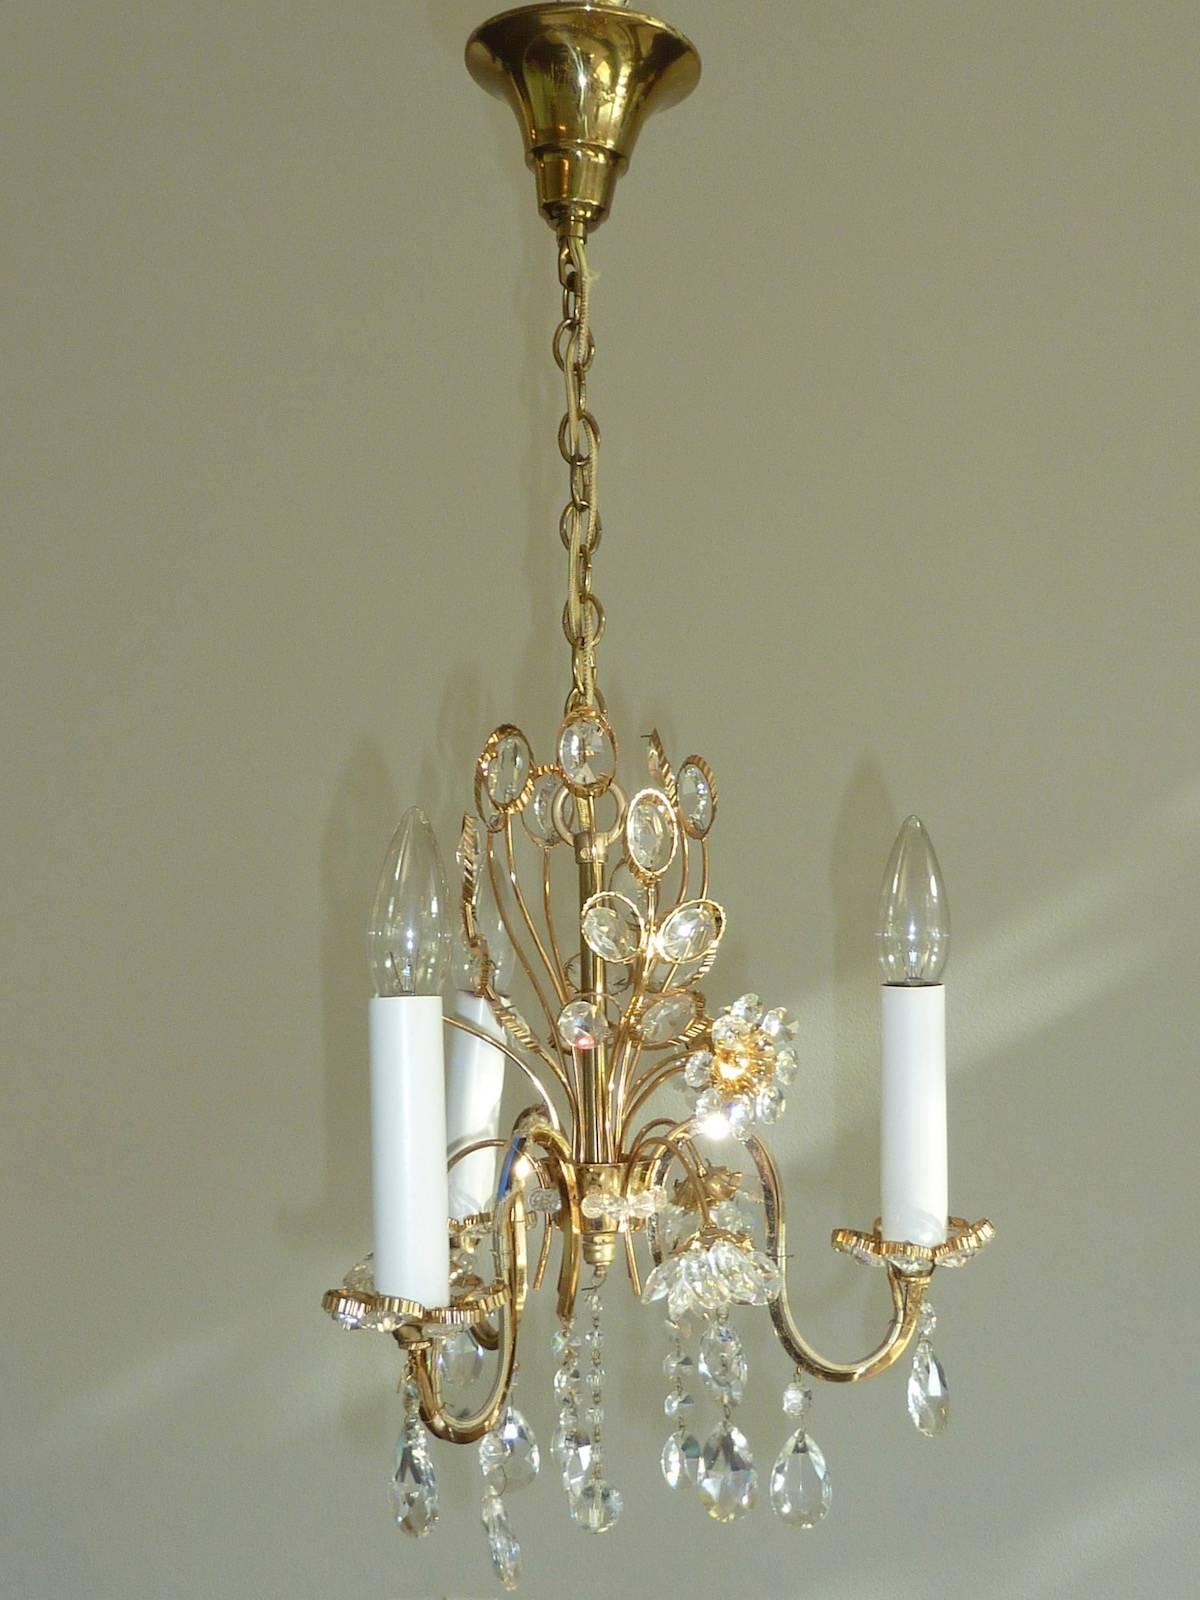 Petite chandelier crystal flowers made by the German company Palwa. The fixture has three European style E14 sockets. It requires three European E14 candelabra bulbs.